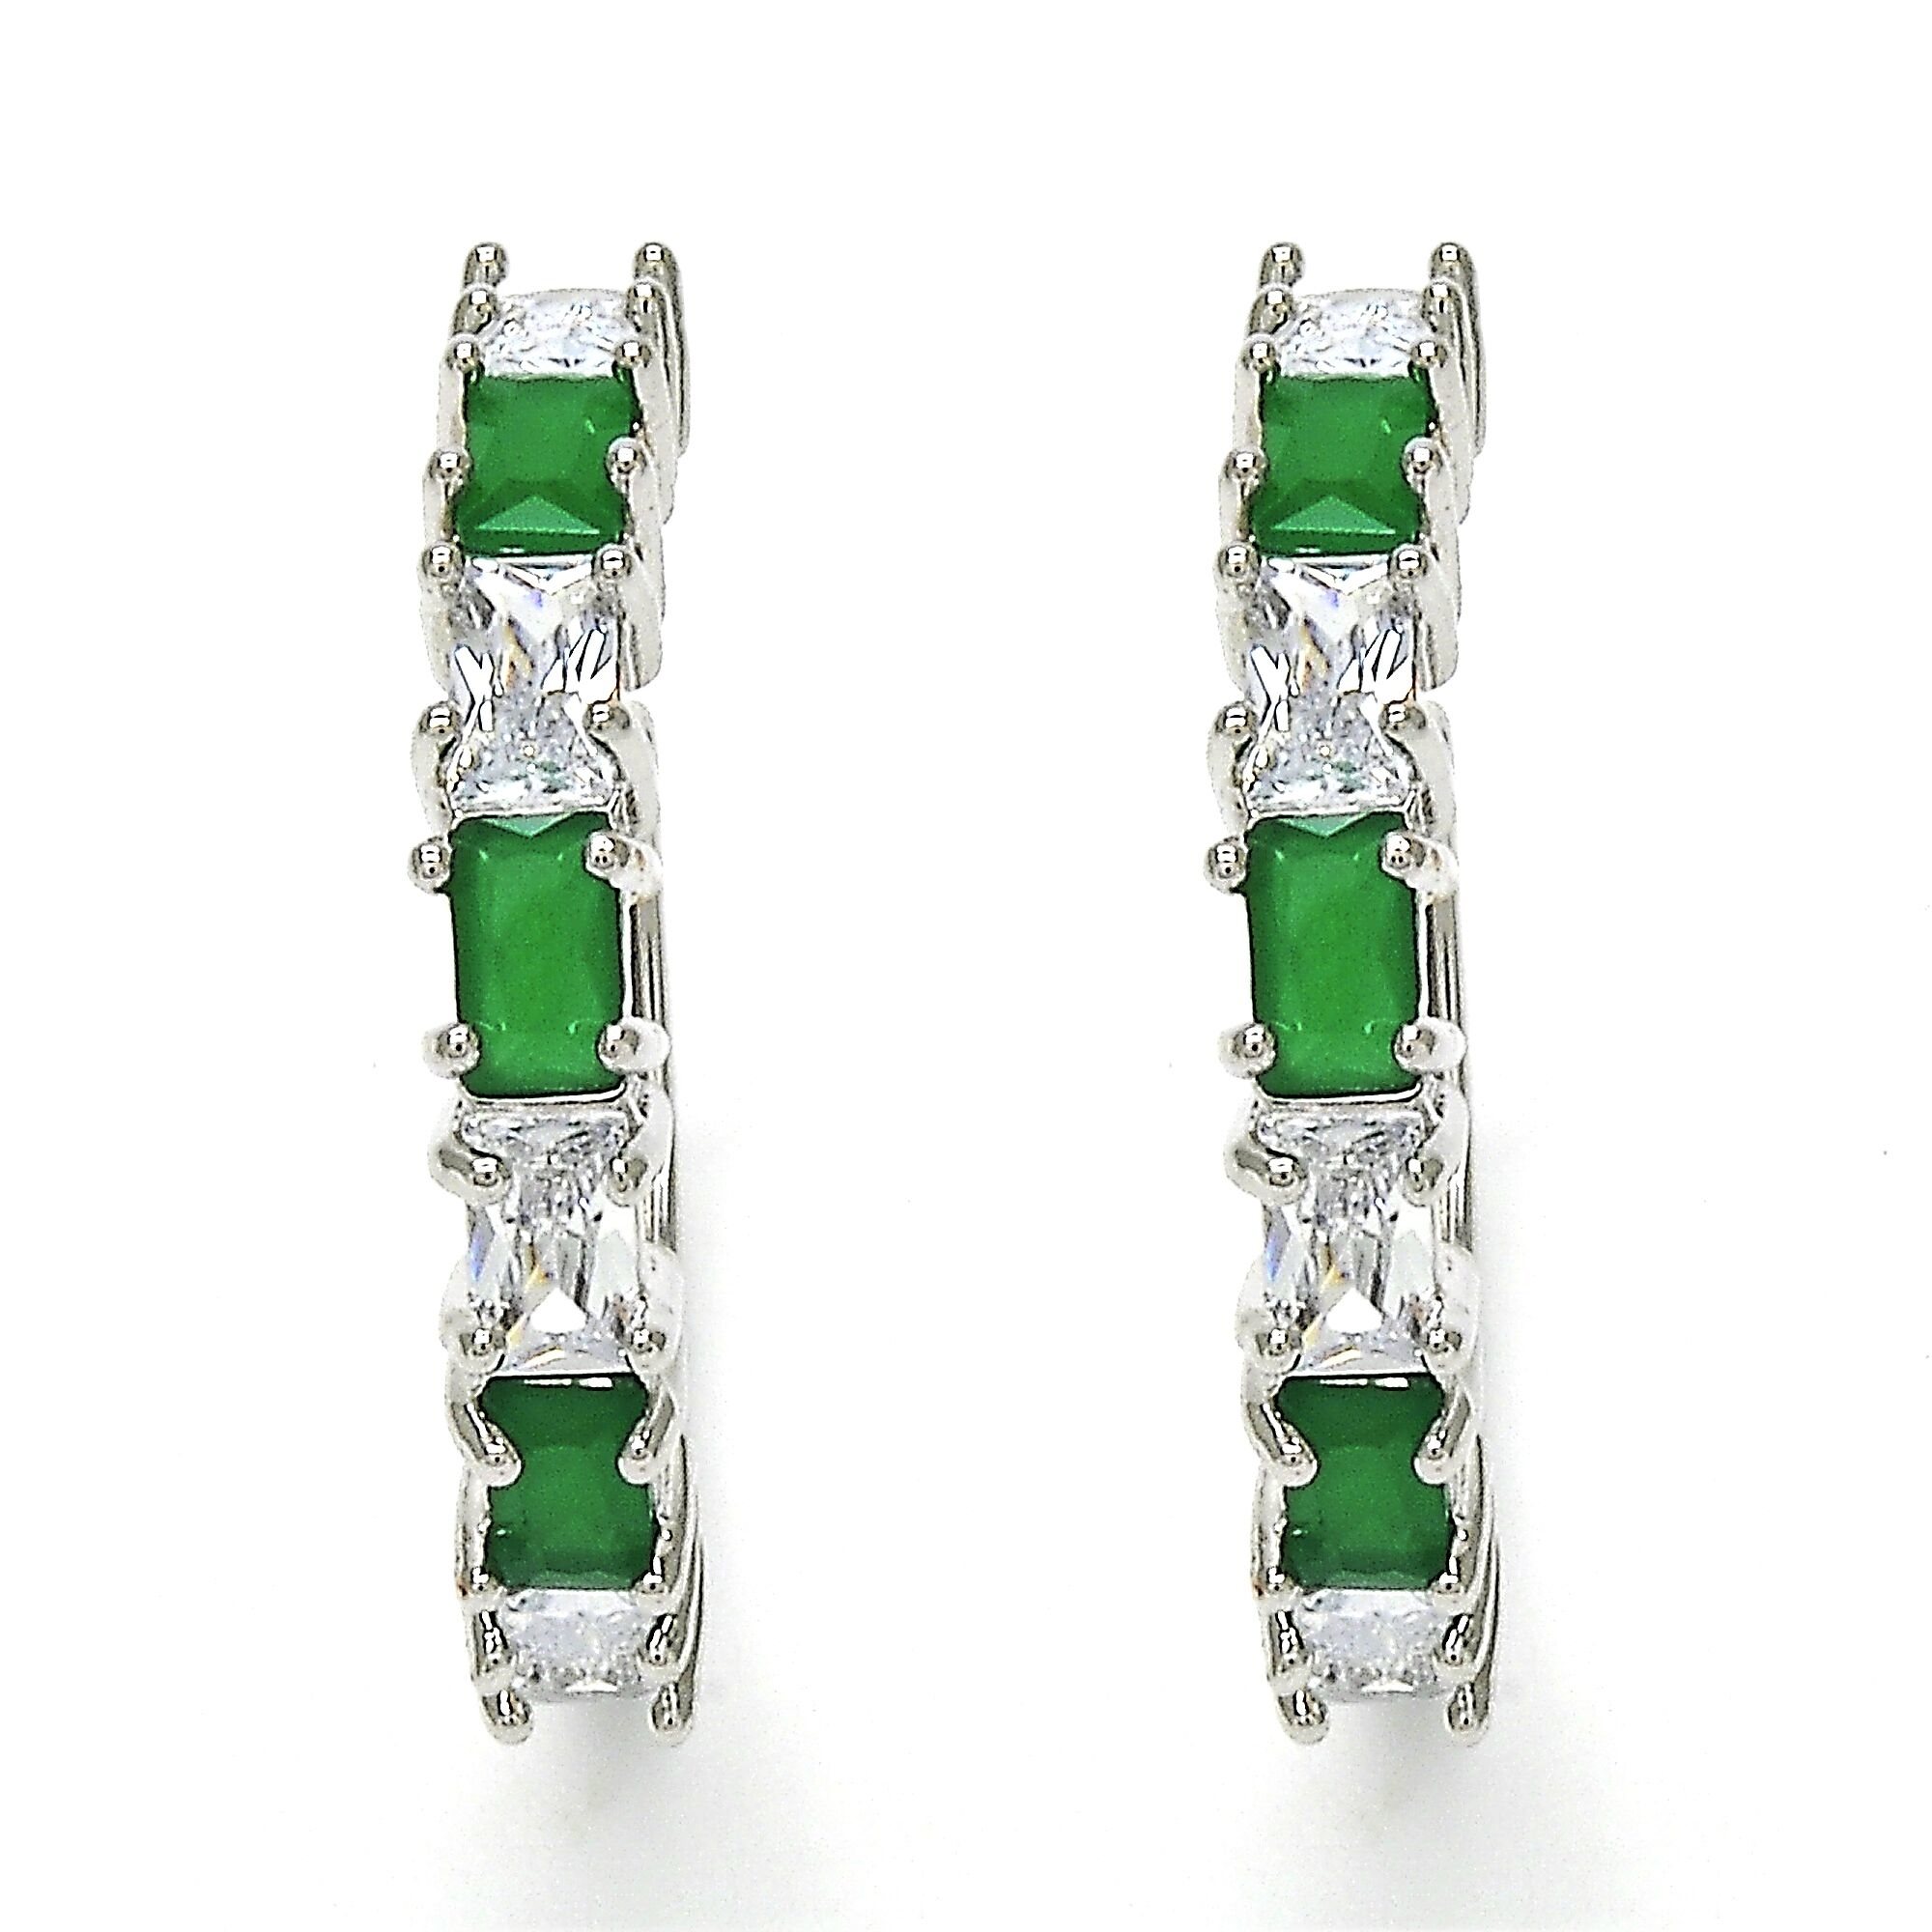 STERLING SILVER Filled High Polish Finsh LAB CREATED Emerald EARRINGS